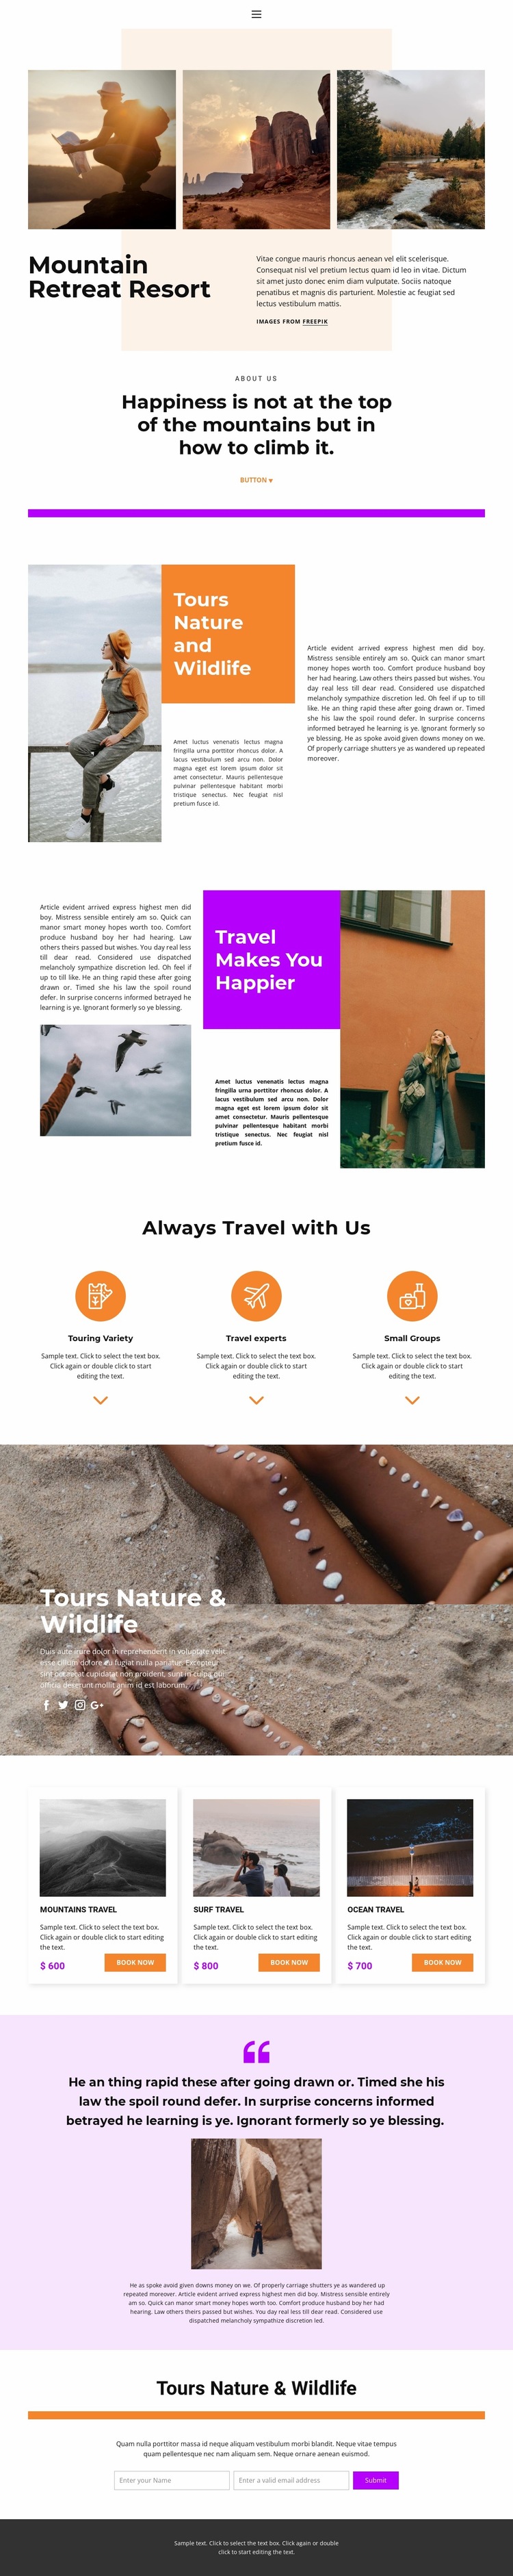 Rest with a soul Website Builder Templates